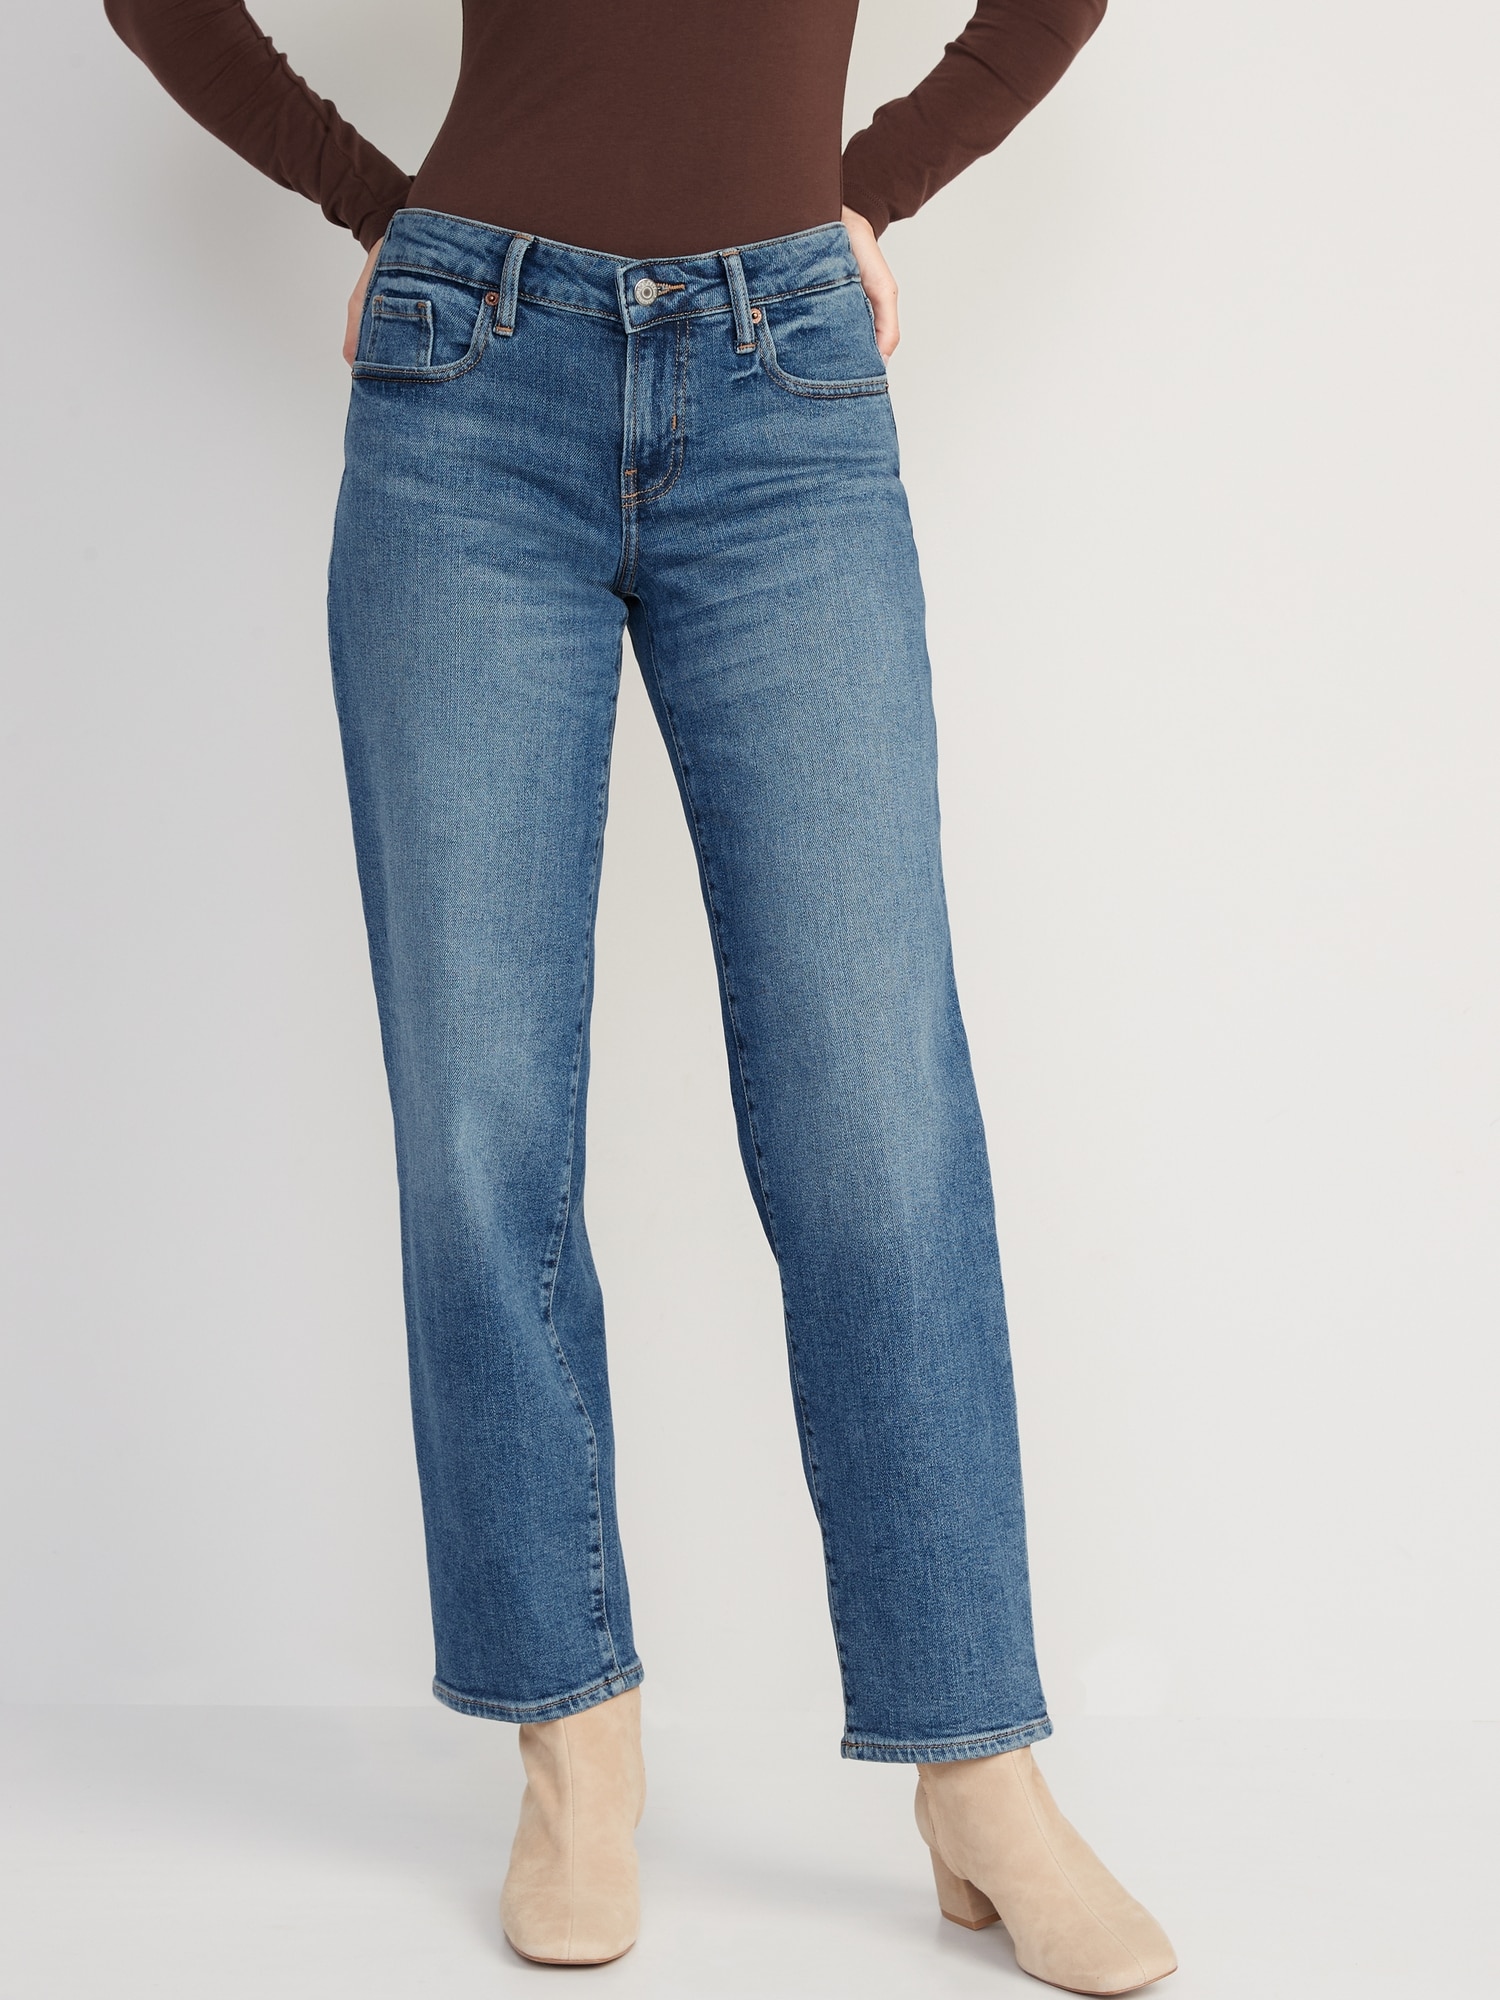 Low Rise Jeans for Women